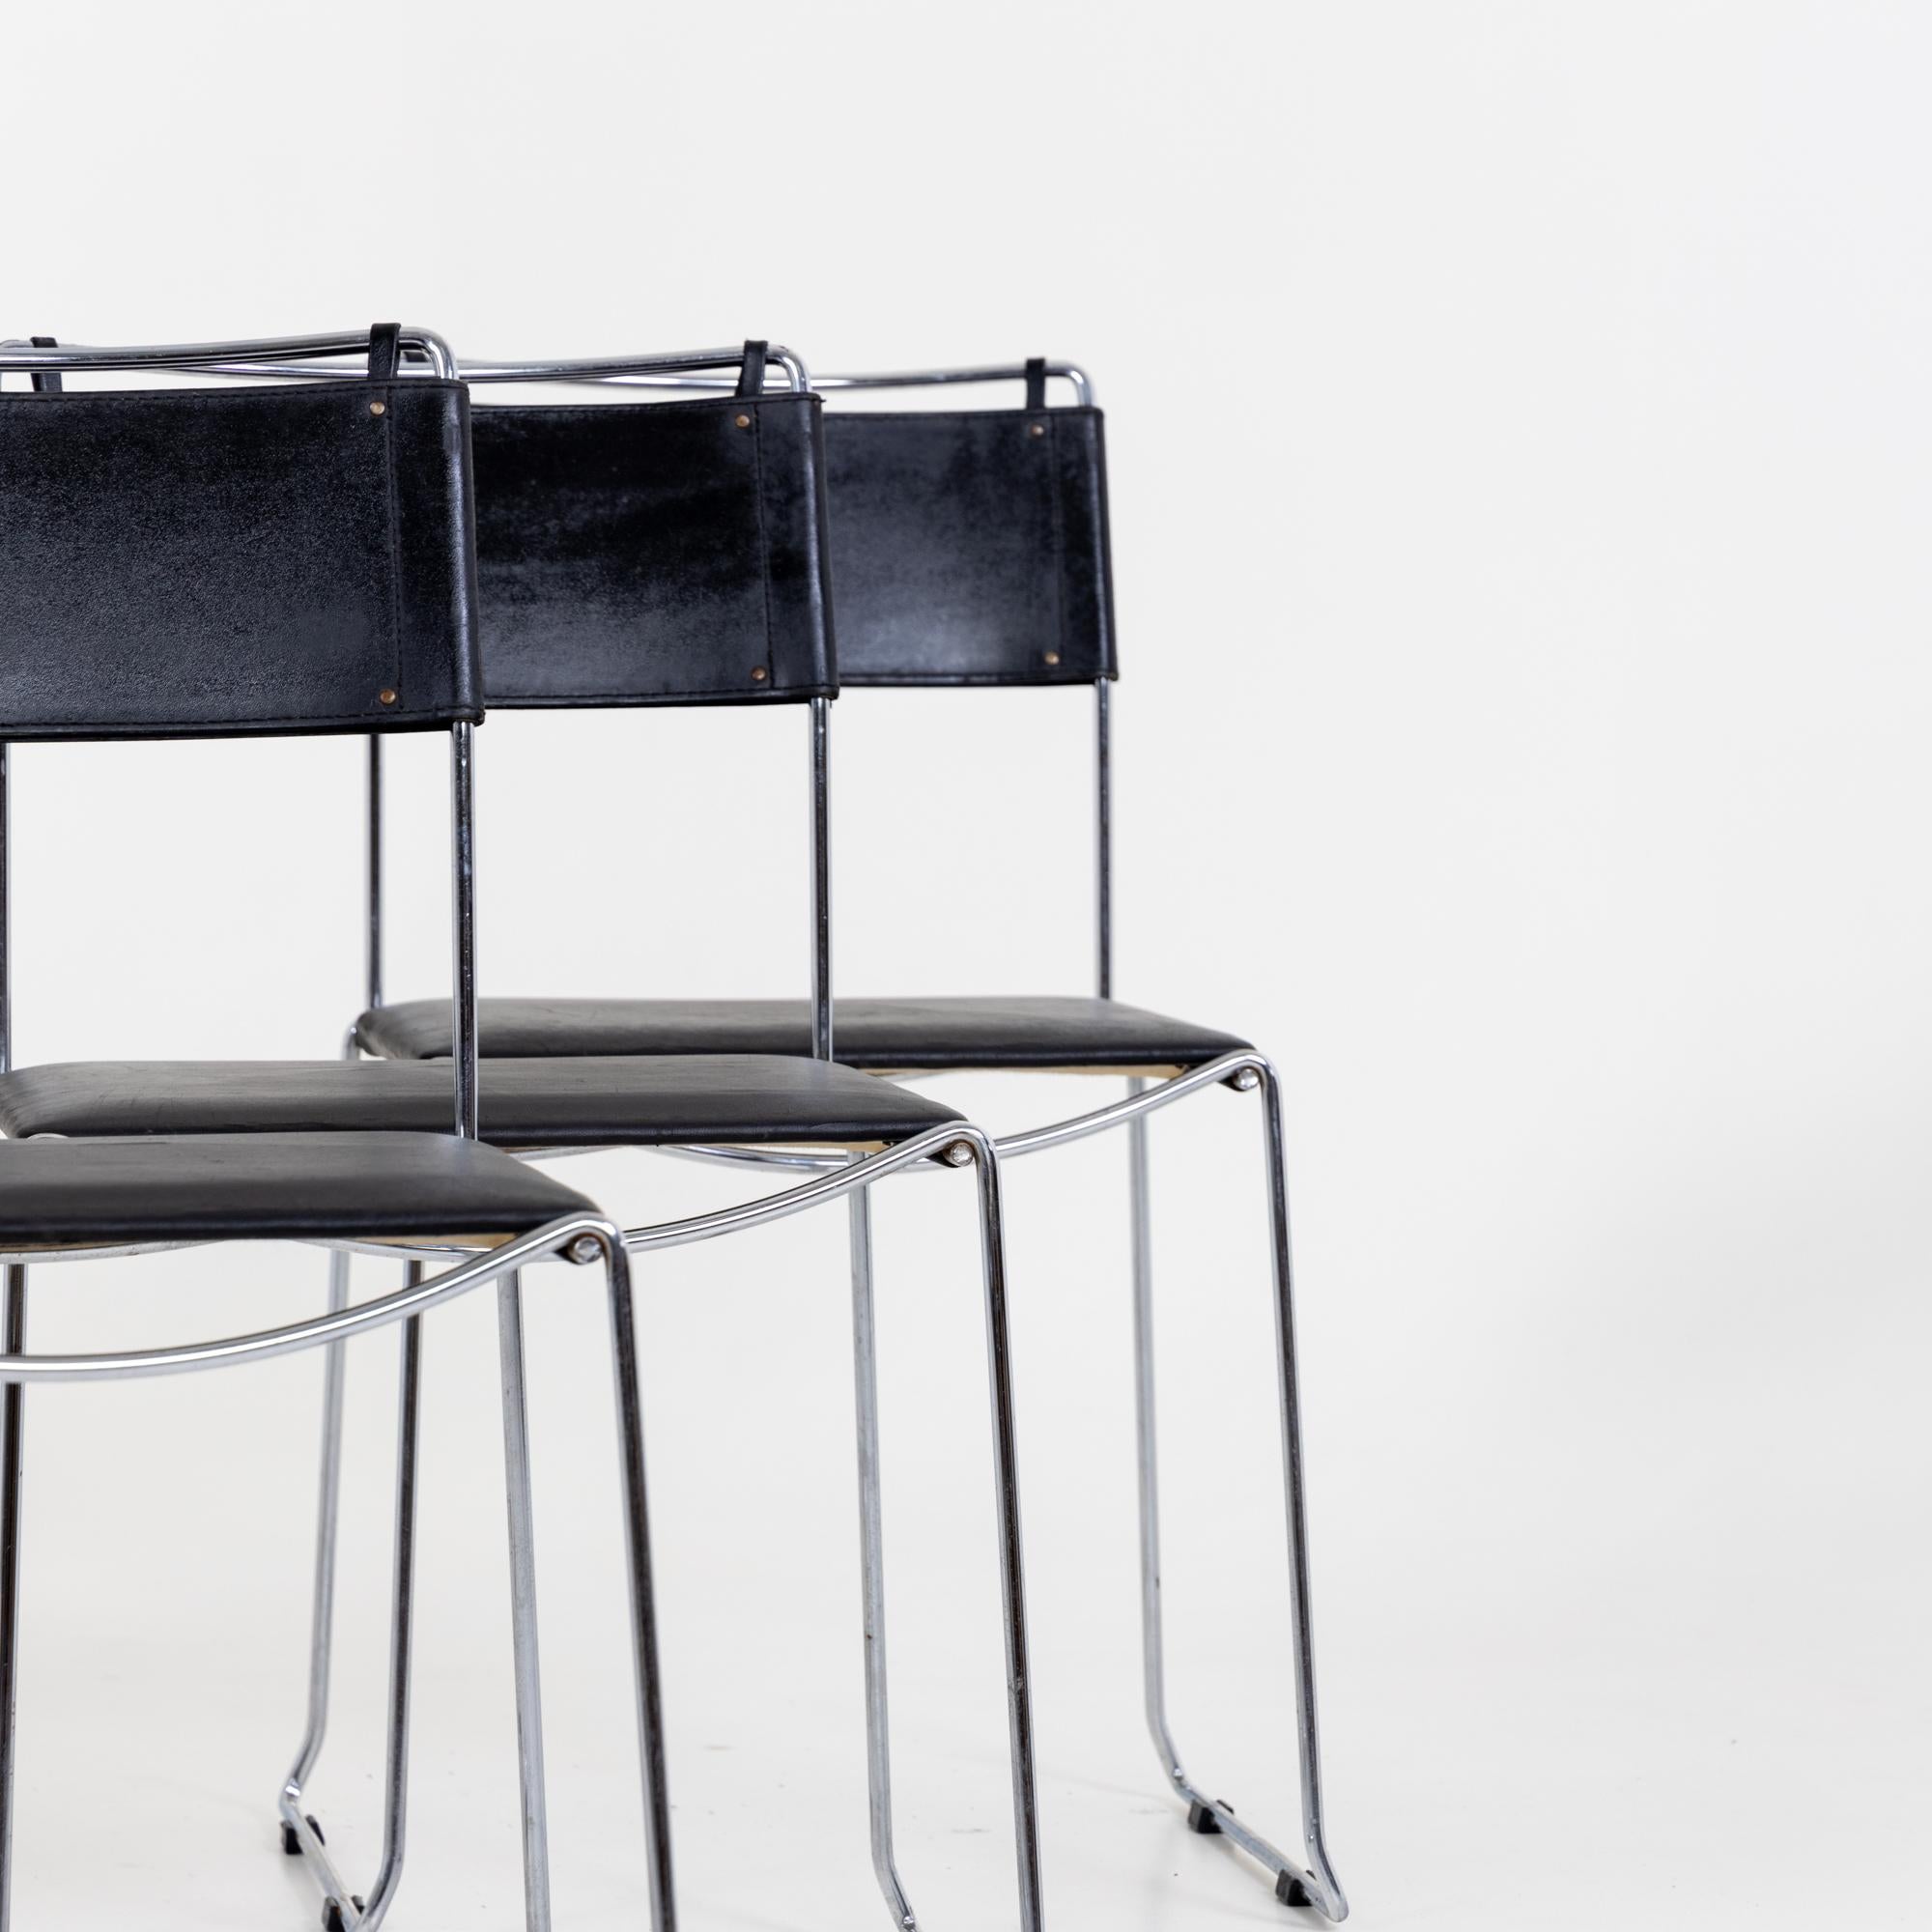 Set of six chairs with chromed metal frames and black seats and backs. The chairs are in good, used condition and covered with a black leather.